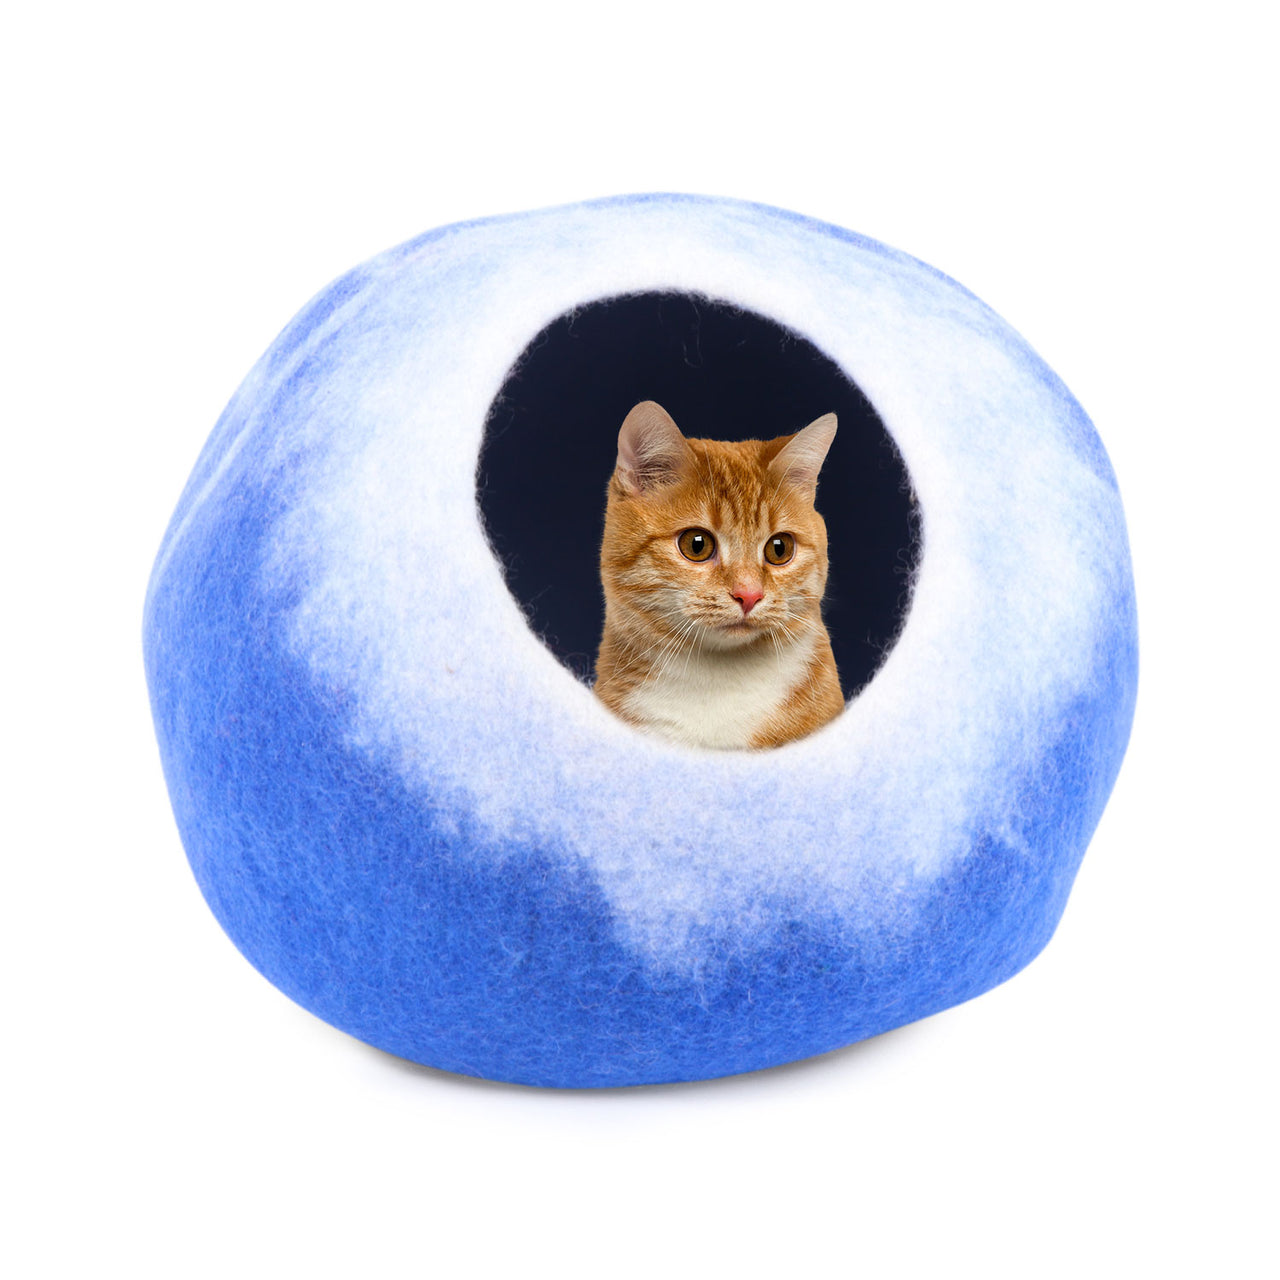 Felt Cat Cave, Handmade from Wool, Cozy Hideout Cat Igloo Pod for Indoor Cats